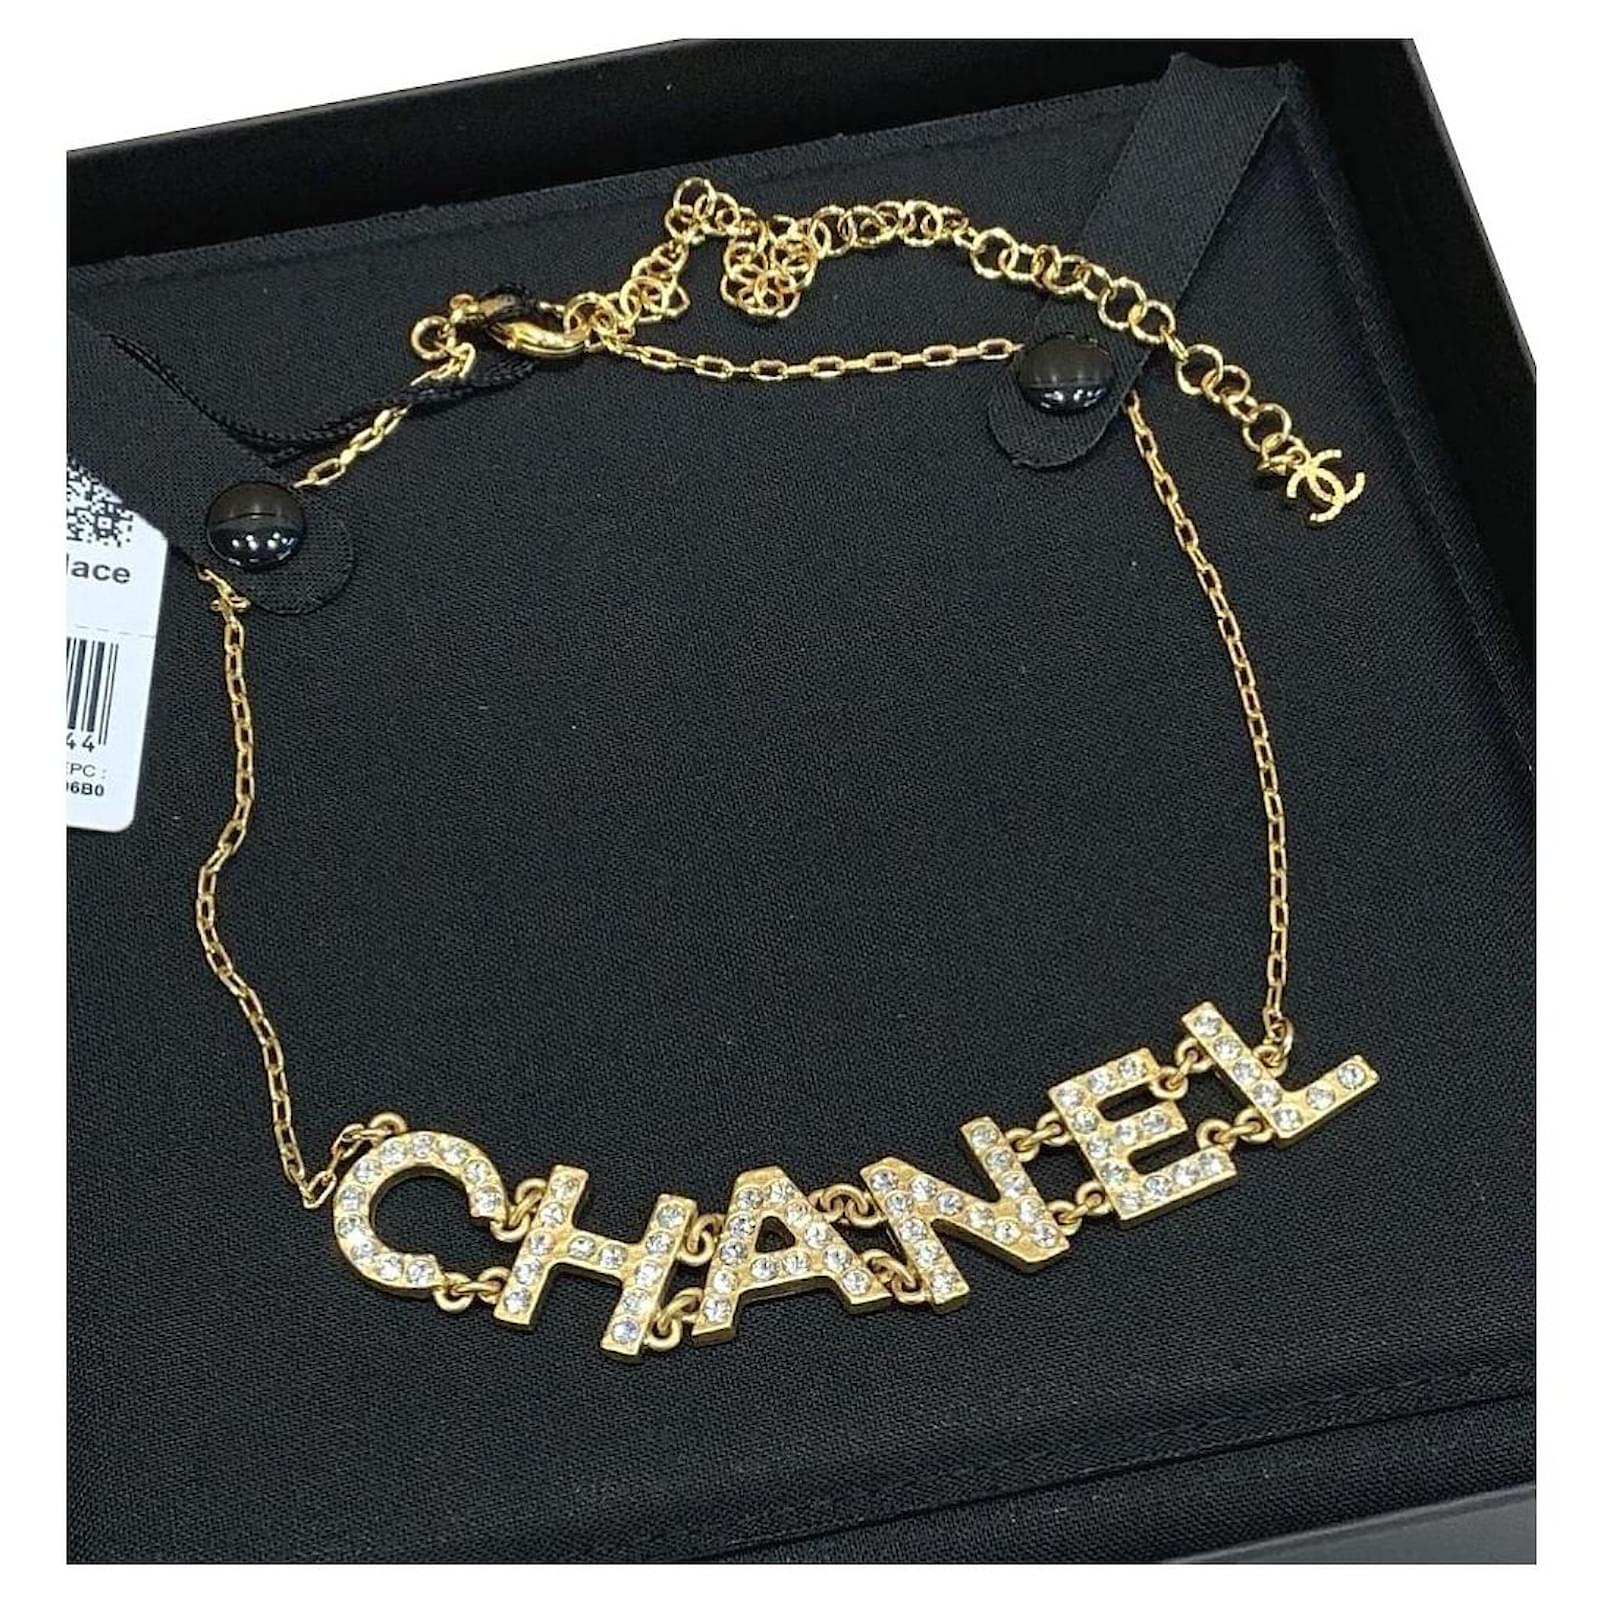 NEW CHANEL NECKLACE CC LOGO STRASS GOLD METAL BALL + NEW NECKLACE BOX